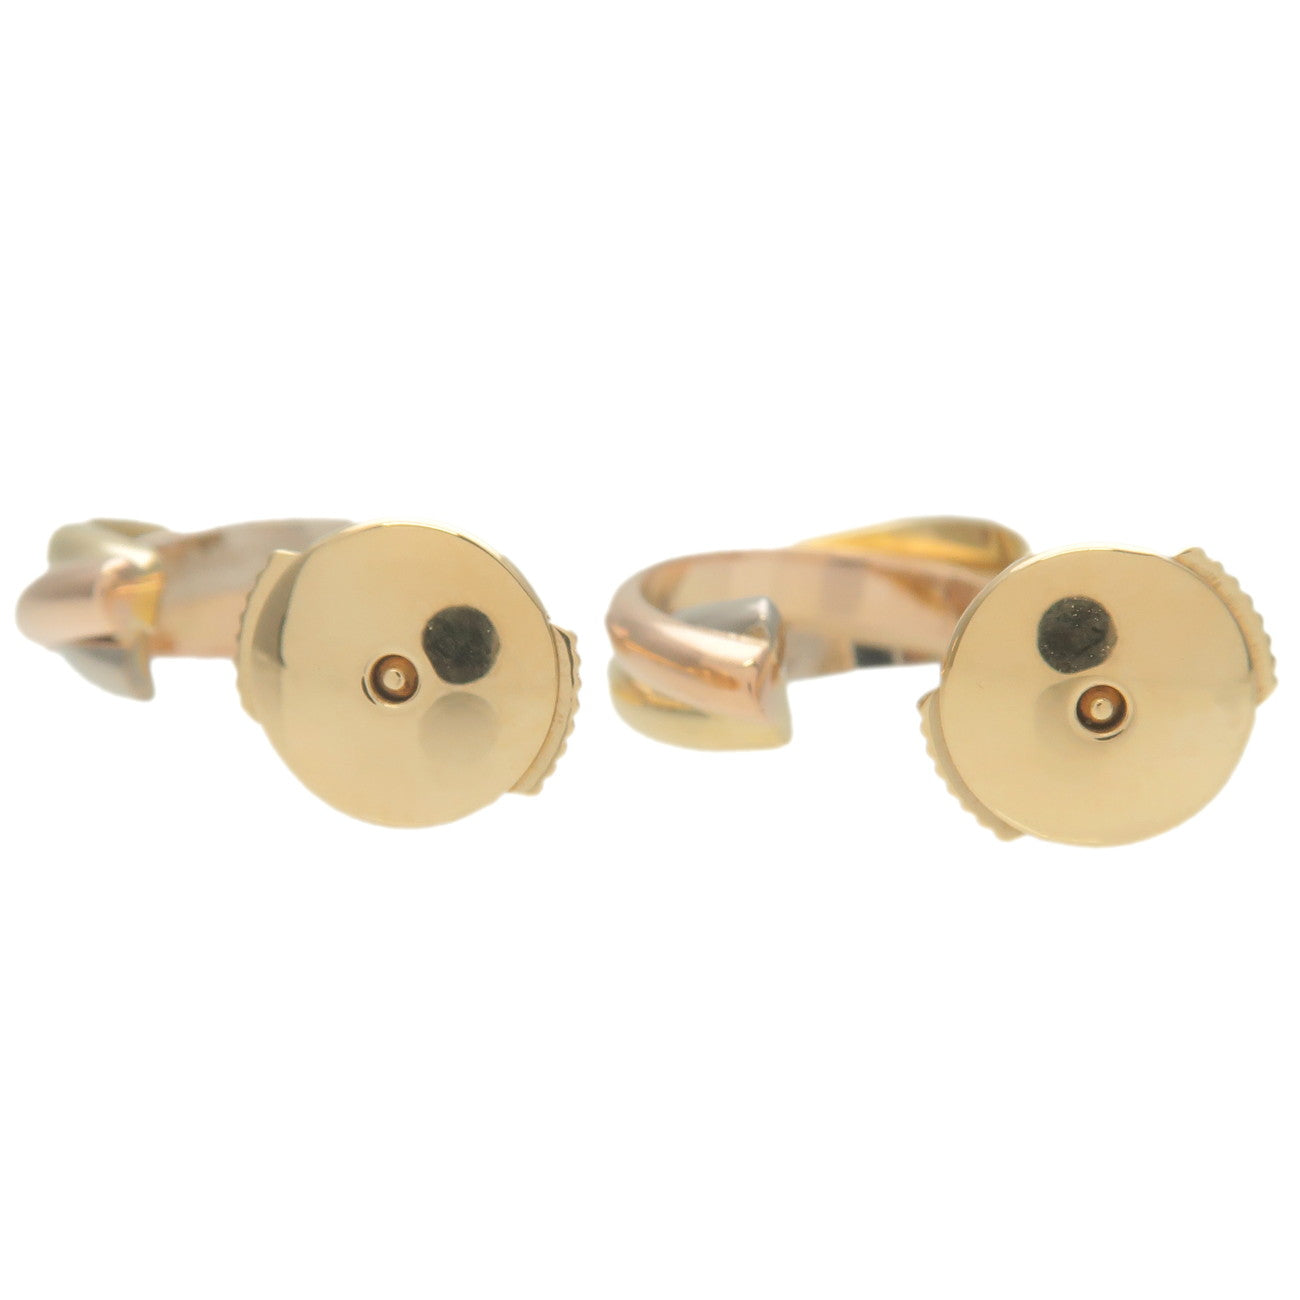 Cartier-Trinity-Earrings-K18-750-Yellow-Gold-White-Gold-Rose-Gold